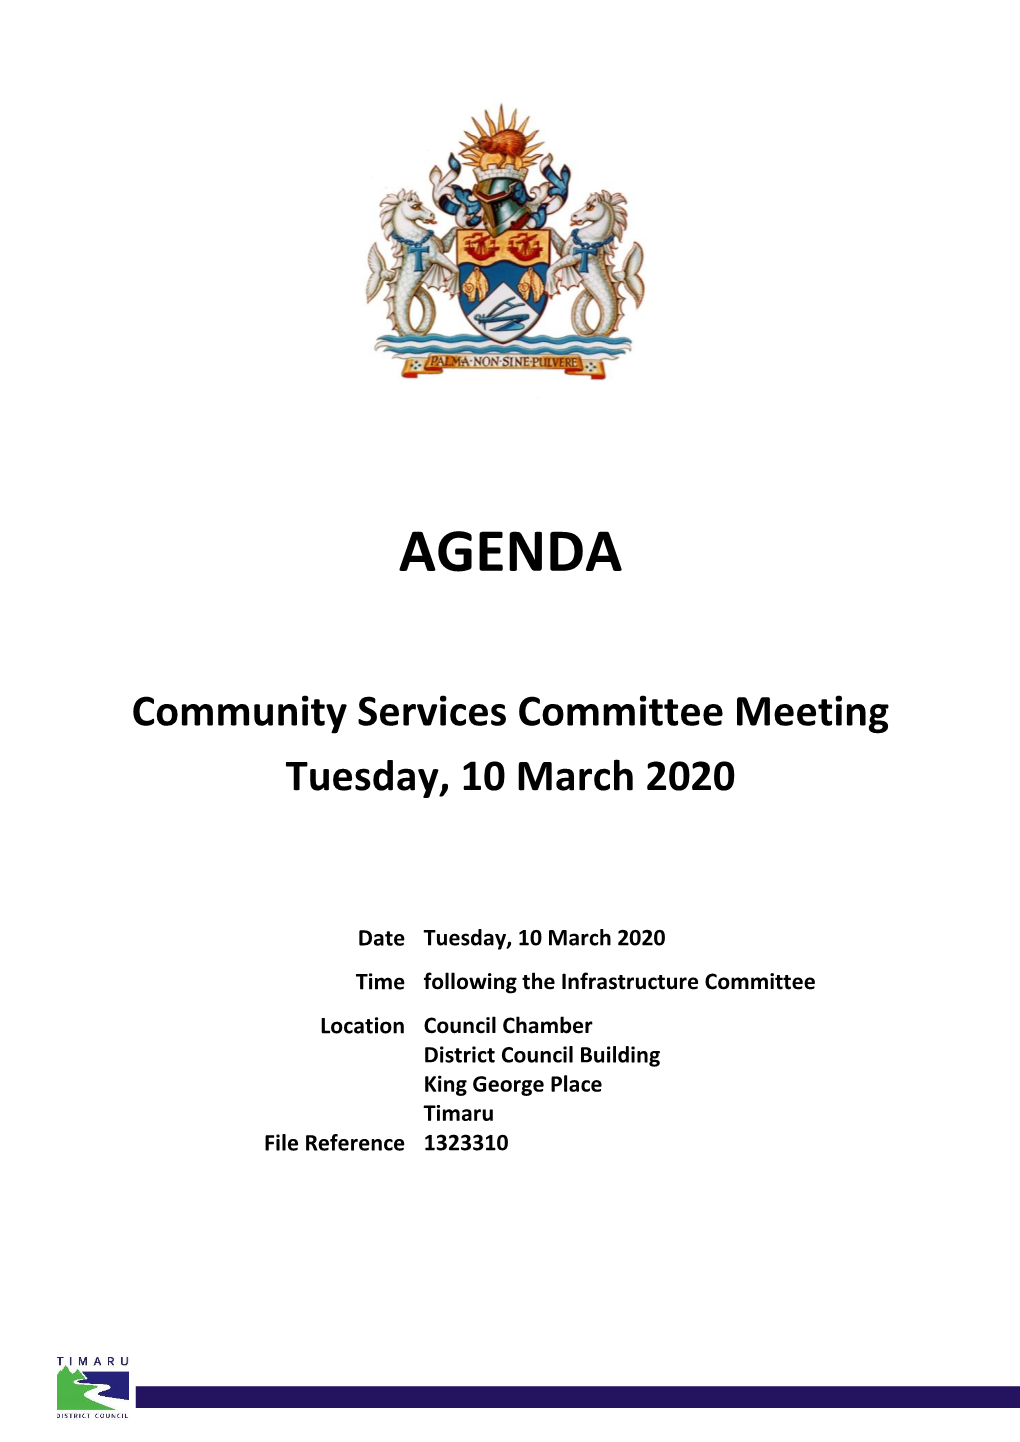 Agenda of Community Services Committee Meeting